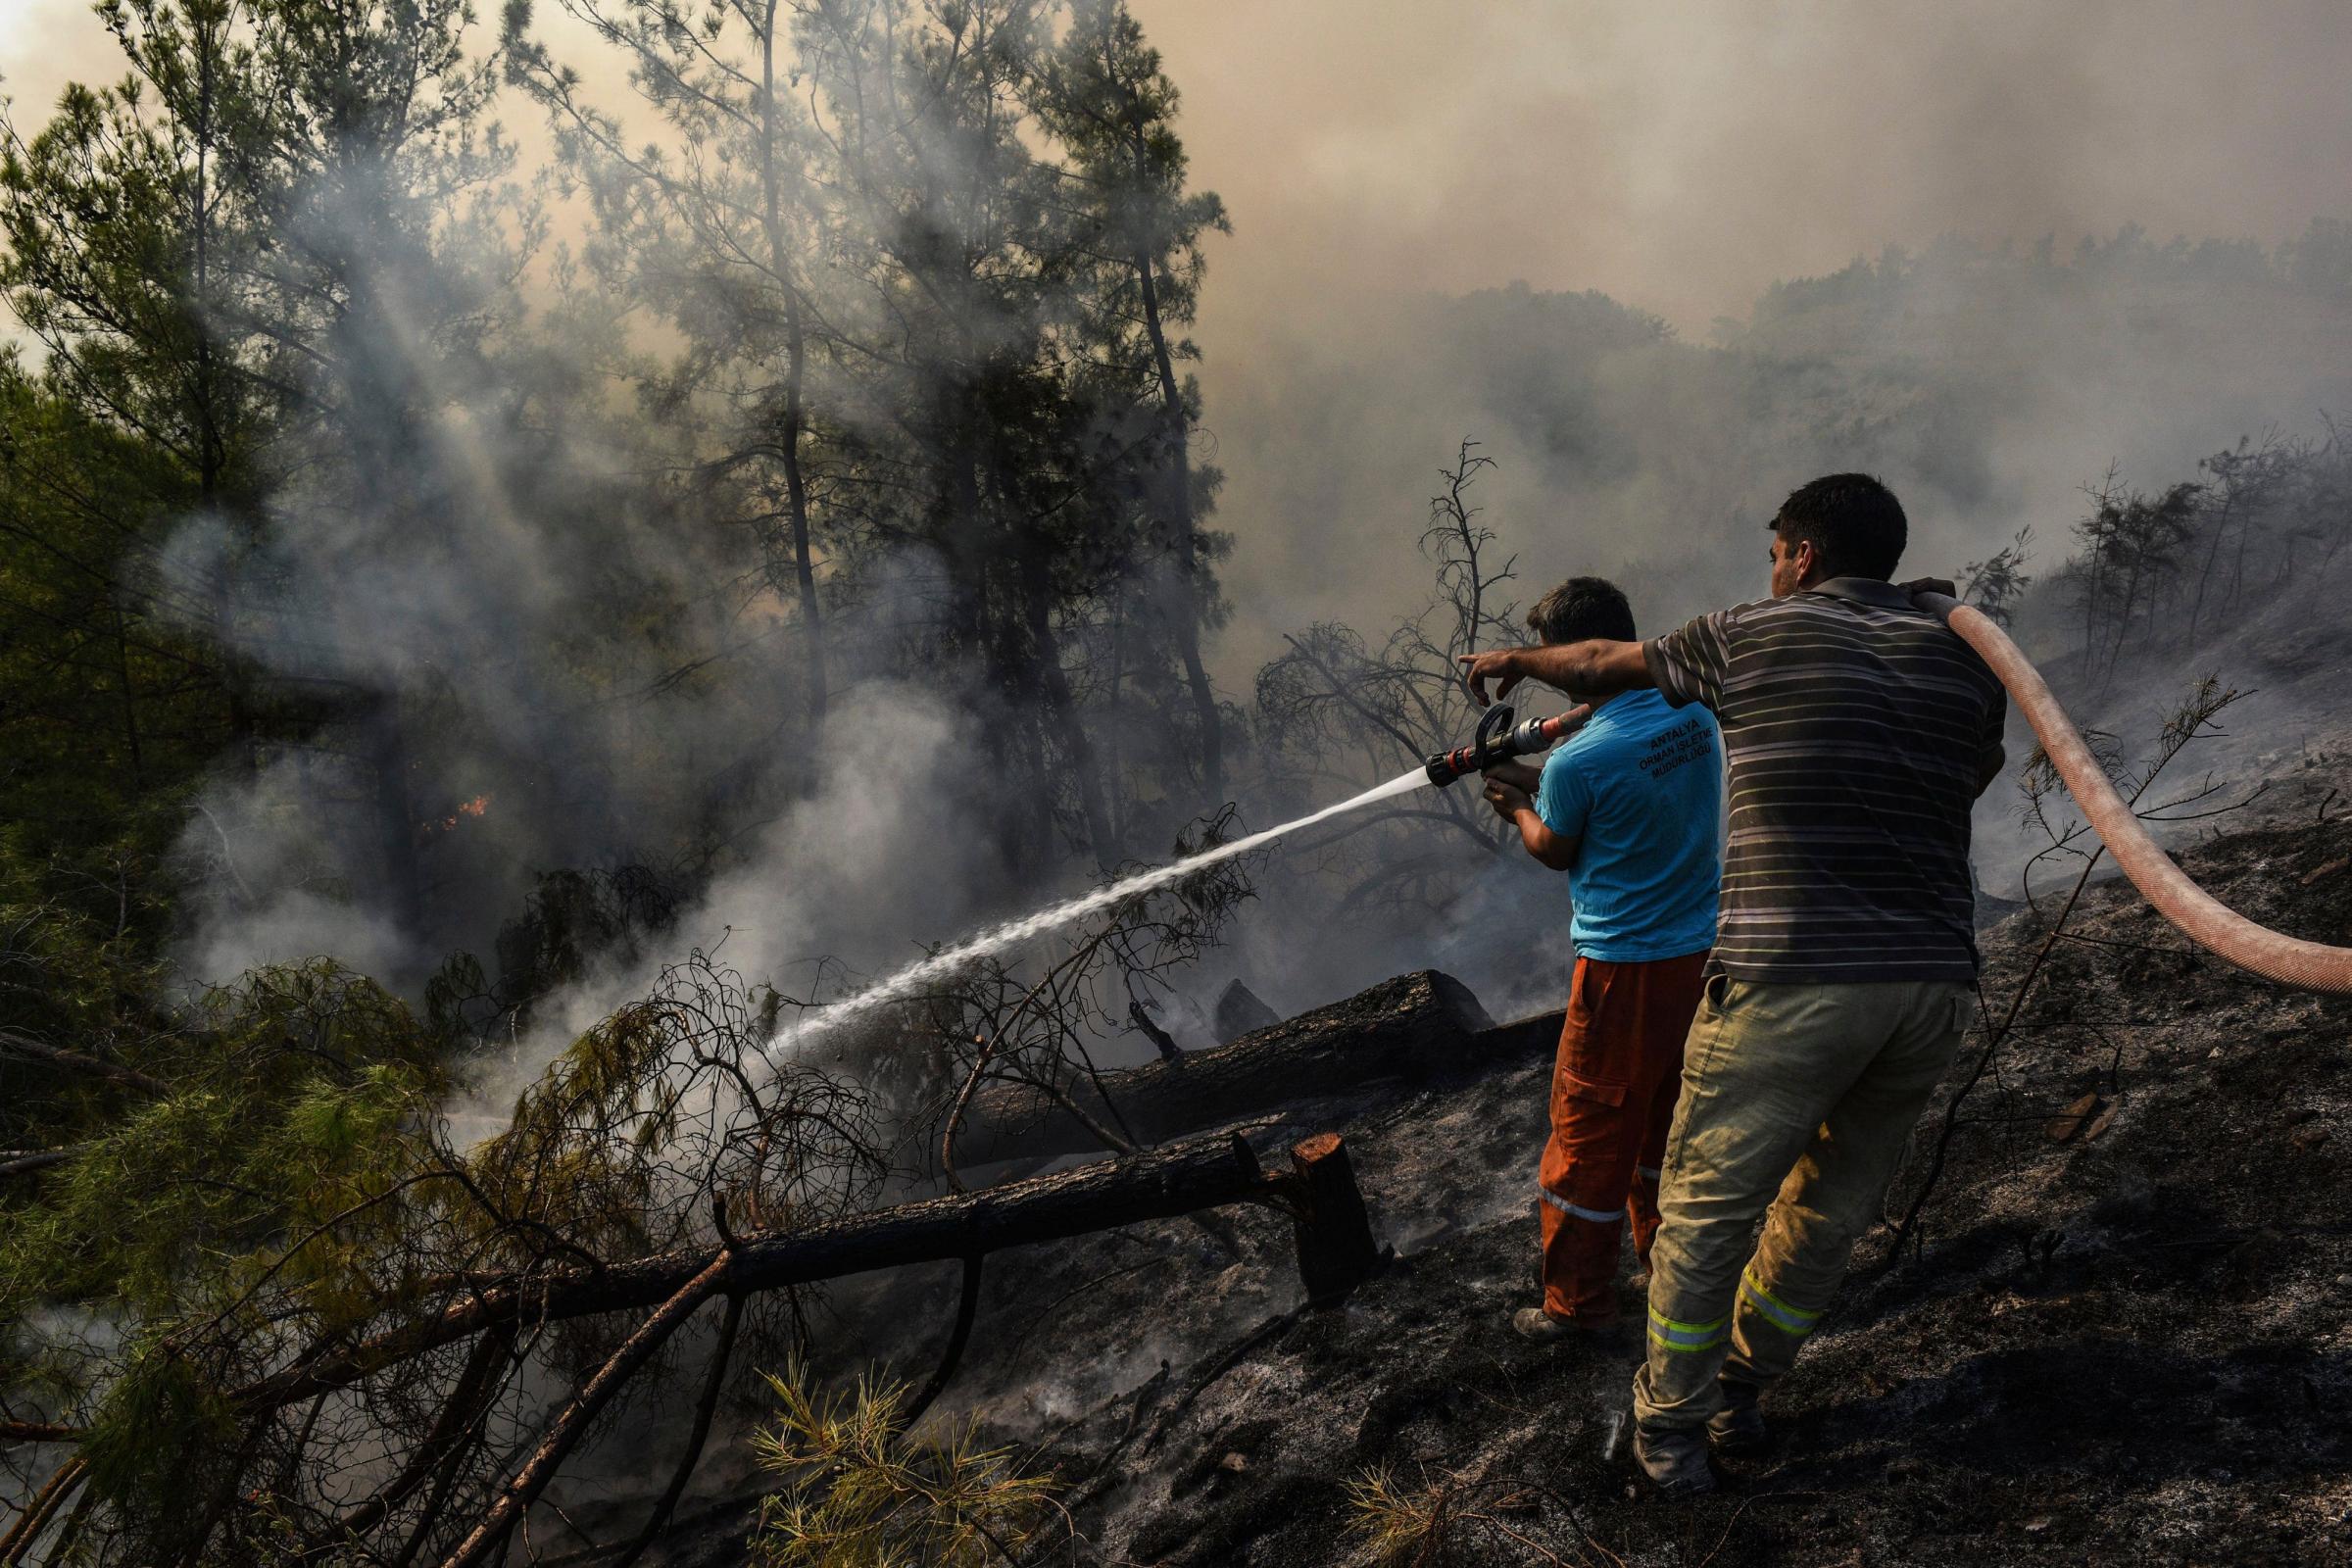 Wildfires rage in Southern Europe as heatwave peaks temperatures to more than 40C; hundreds of people evacuated